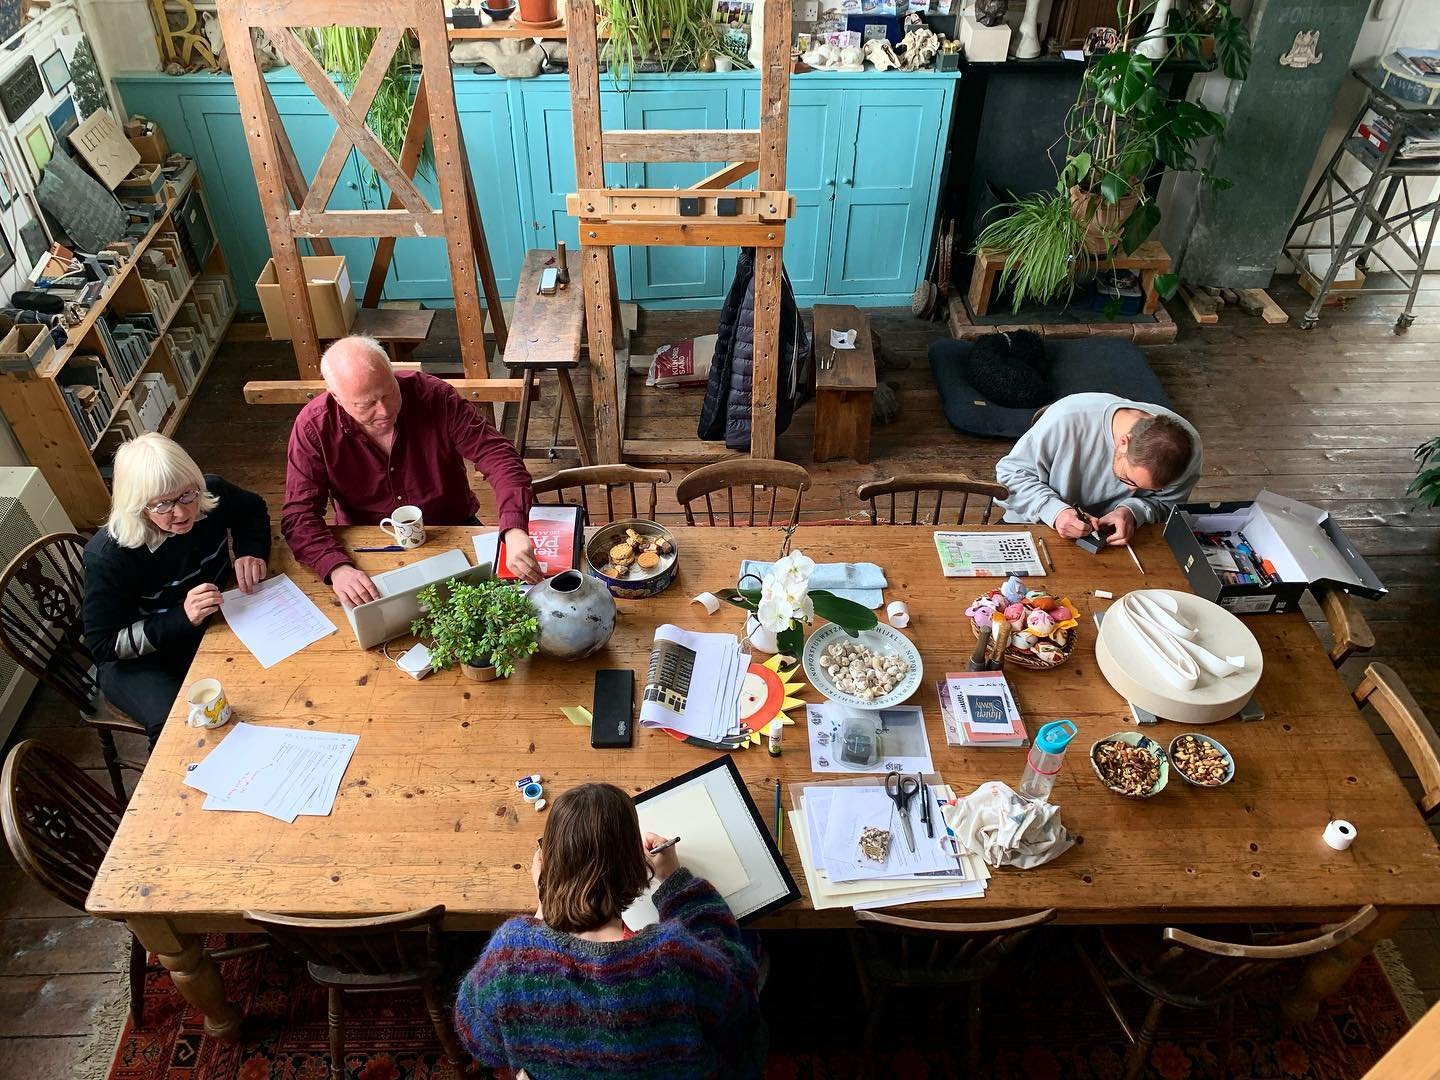 Busy Workshop scenes this morning. 

Lida and Steve are busily working on their upcoming book, whilst Fiona works on the illustrations. Meanwhile Vince is drawing out a stone ✍️. 

#thecardozokindersleyworkshop #lidacardozokindersley #davidkindersley